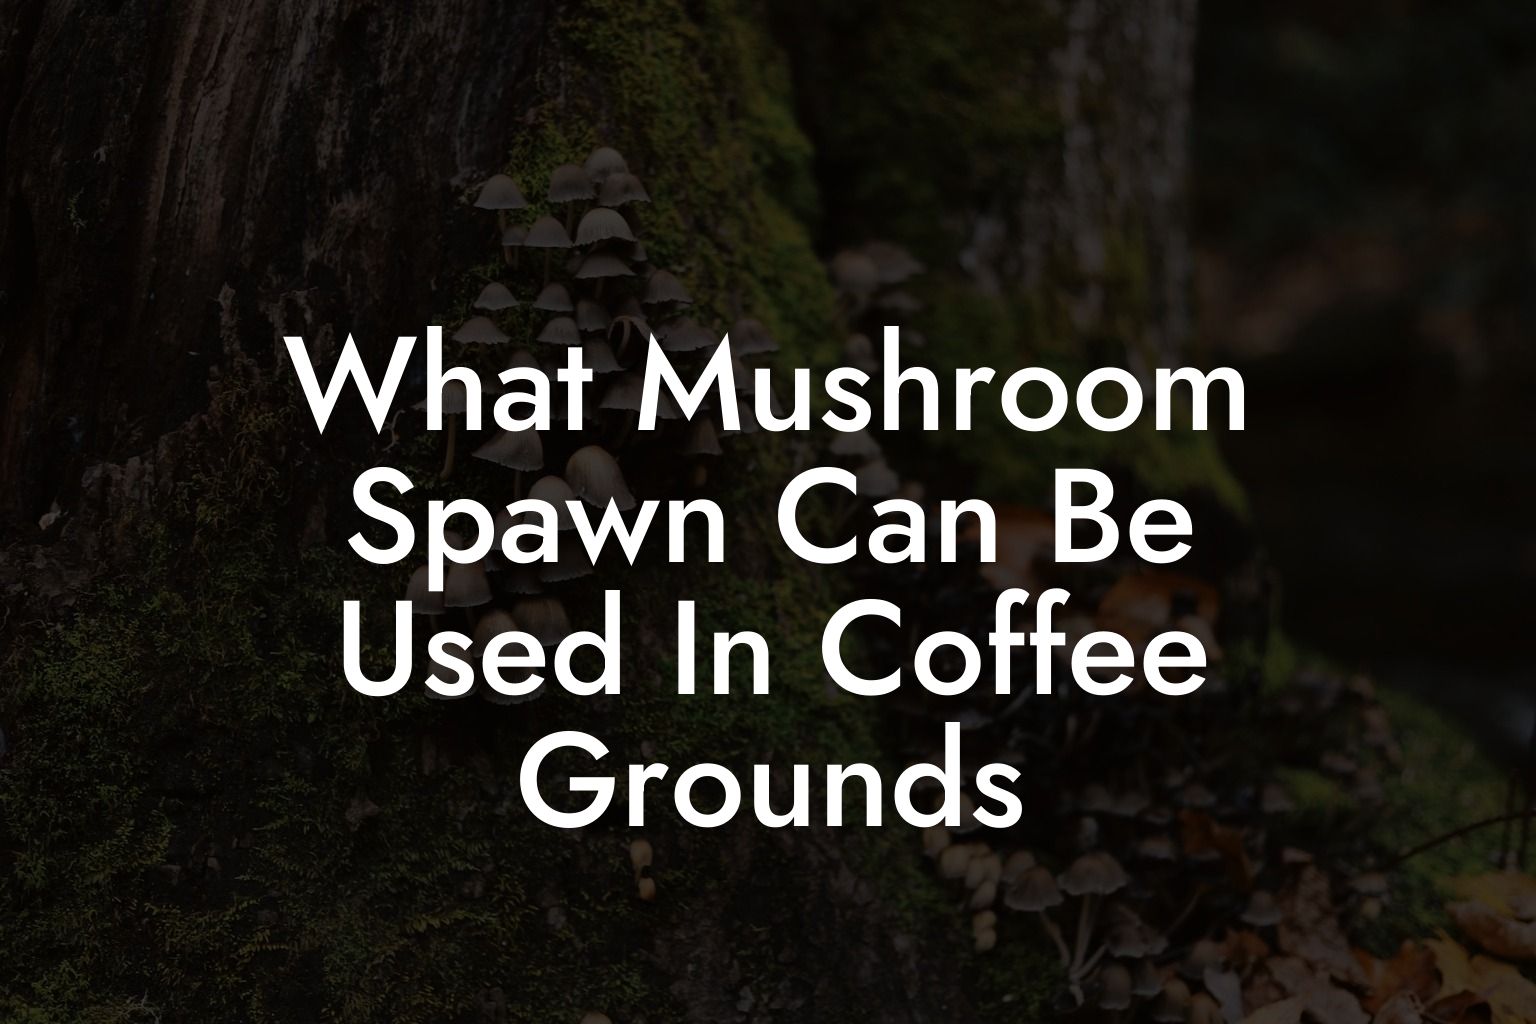 What Mushroom Spawn Can Be Used In Coffee Grounds